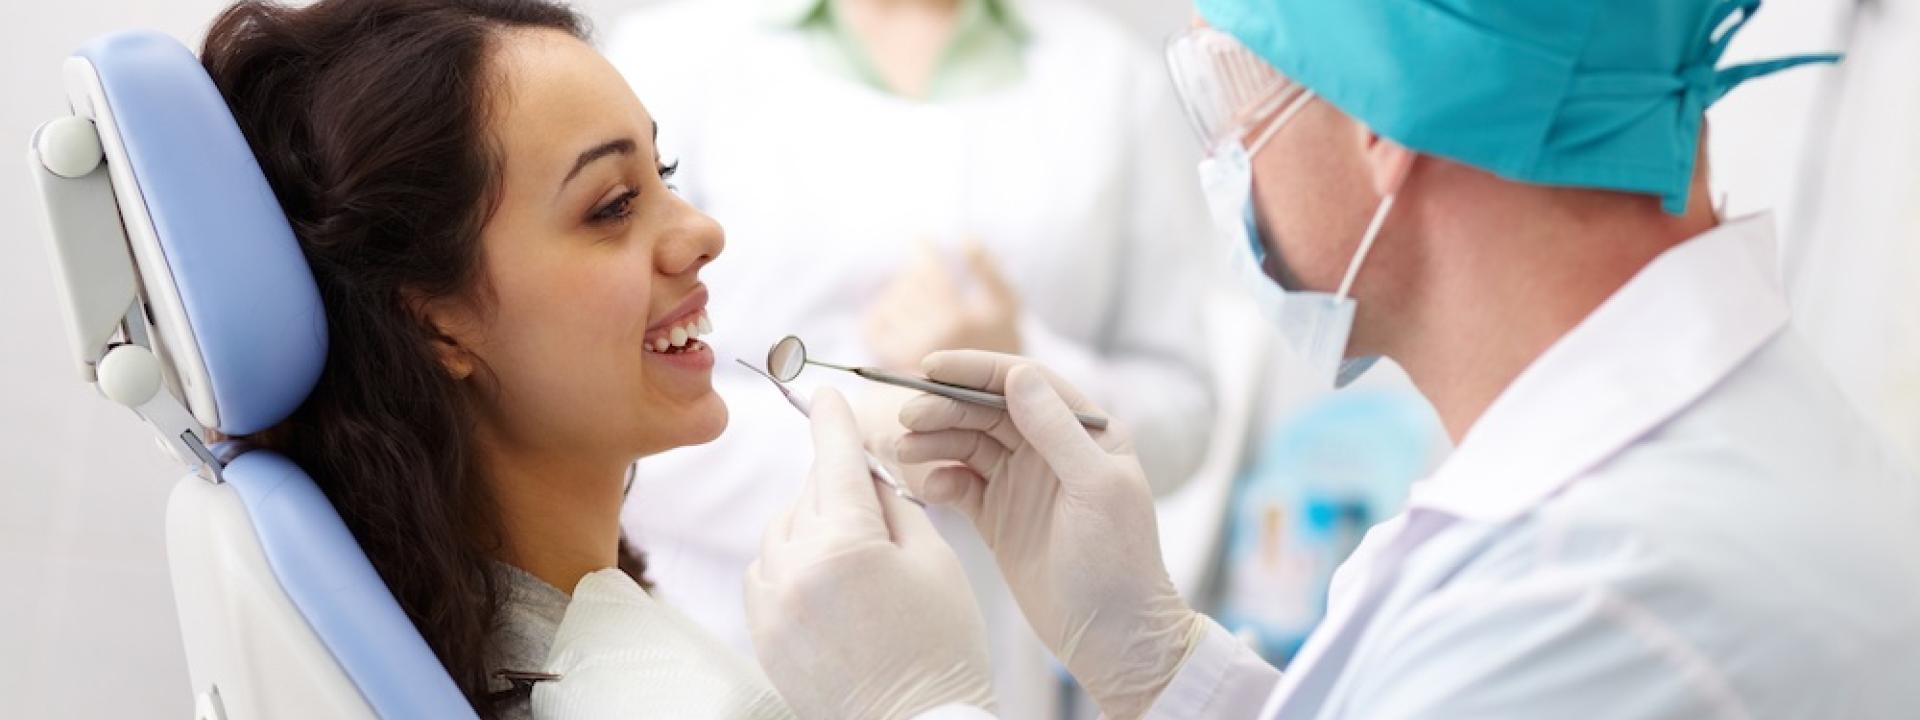 How Regular Teeth Cleanings Benefit Overall Health